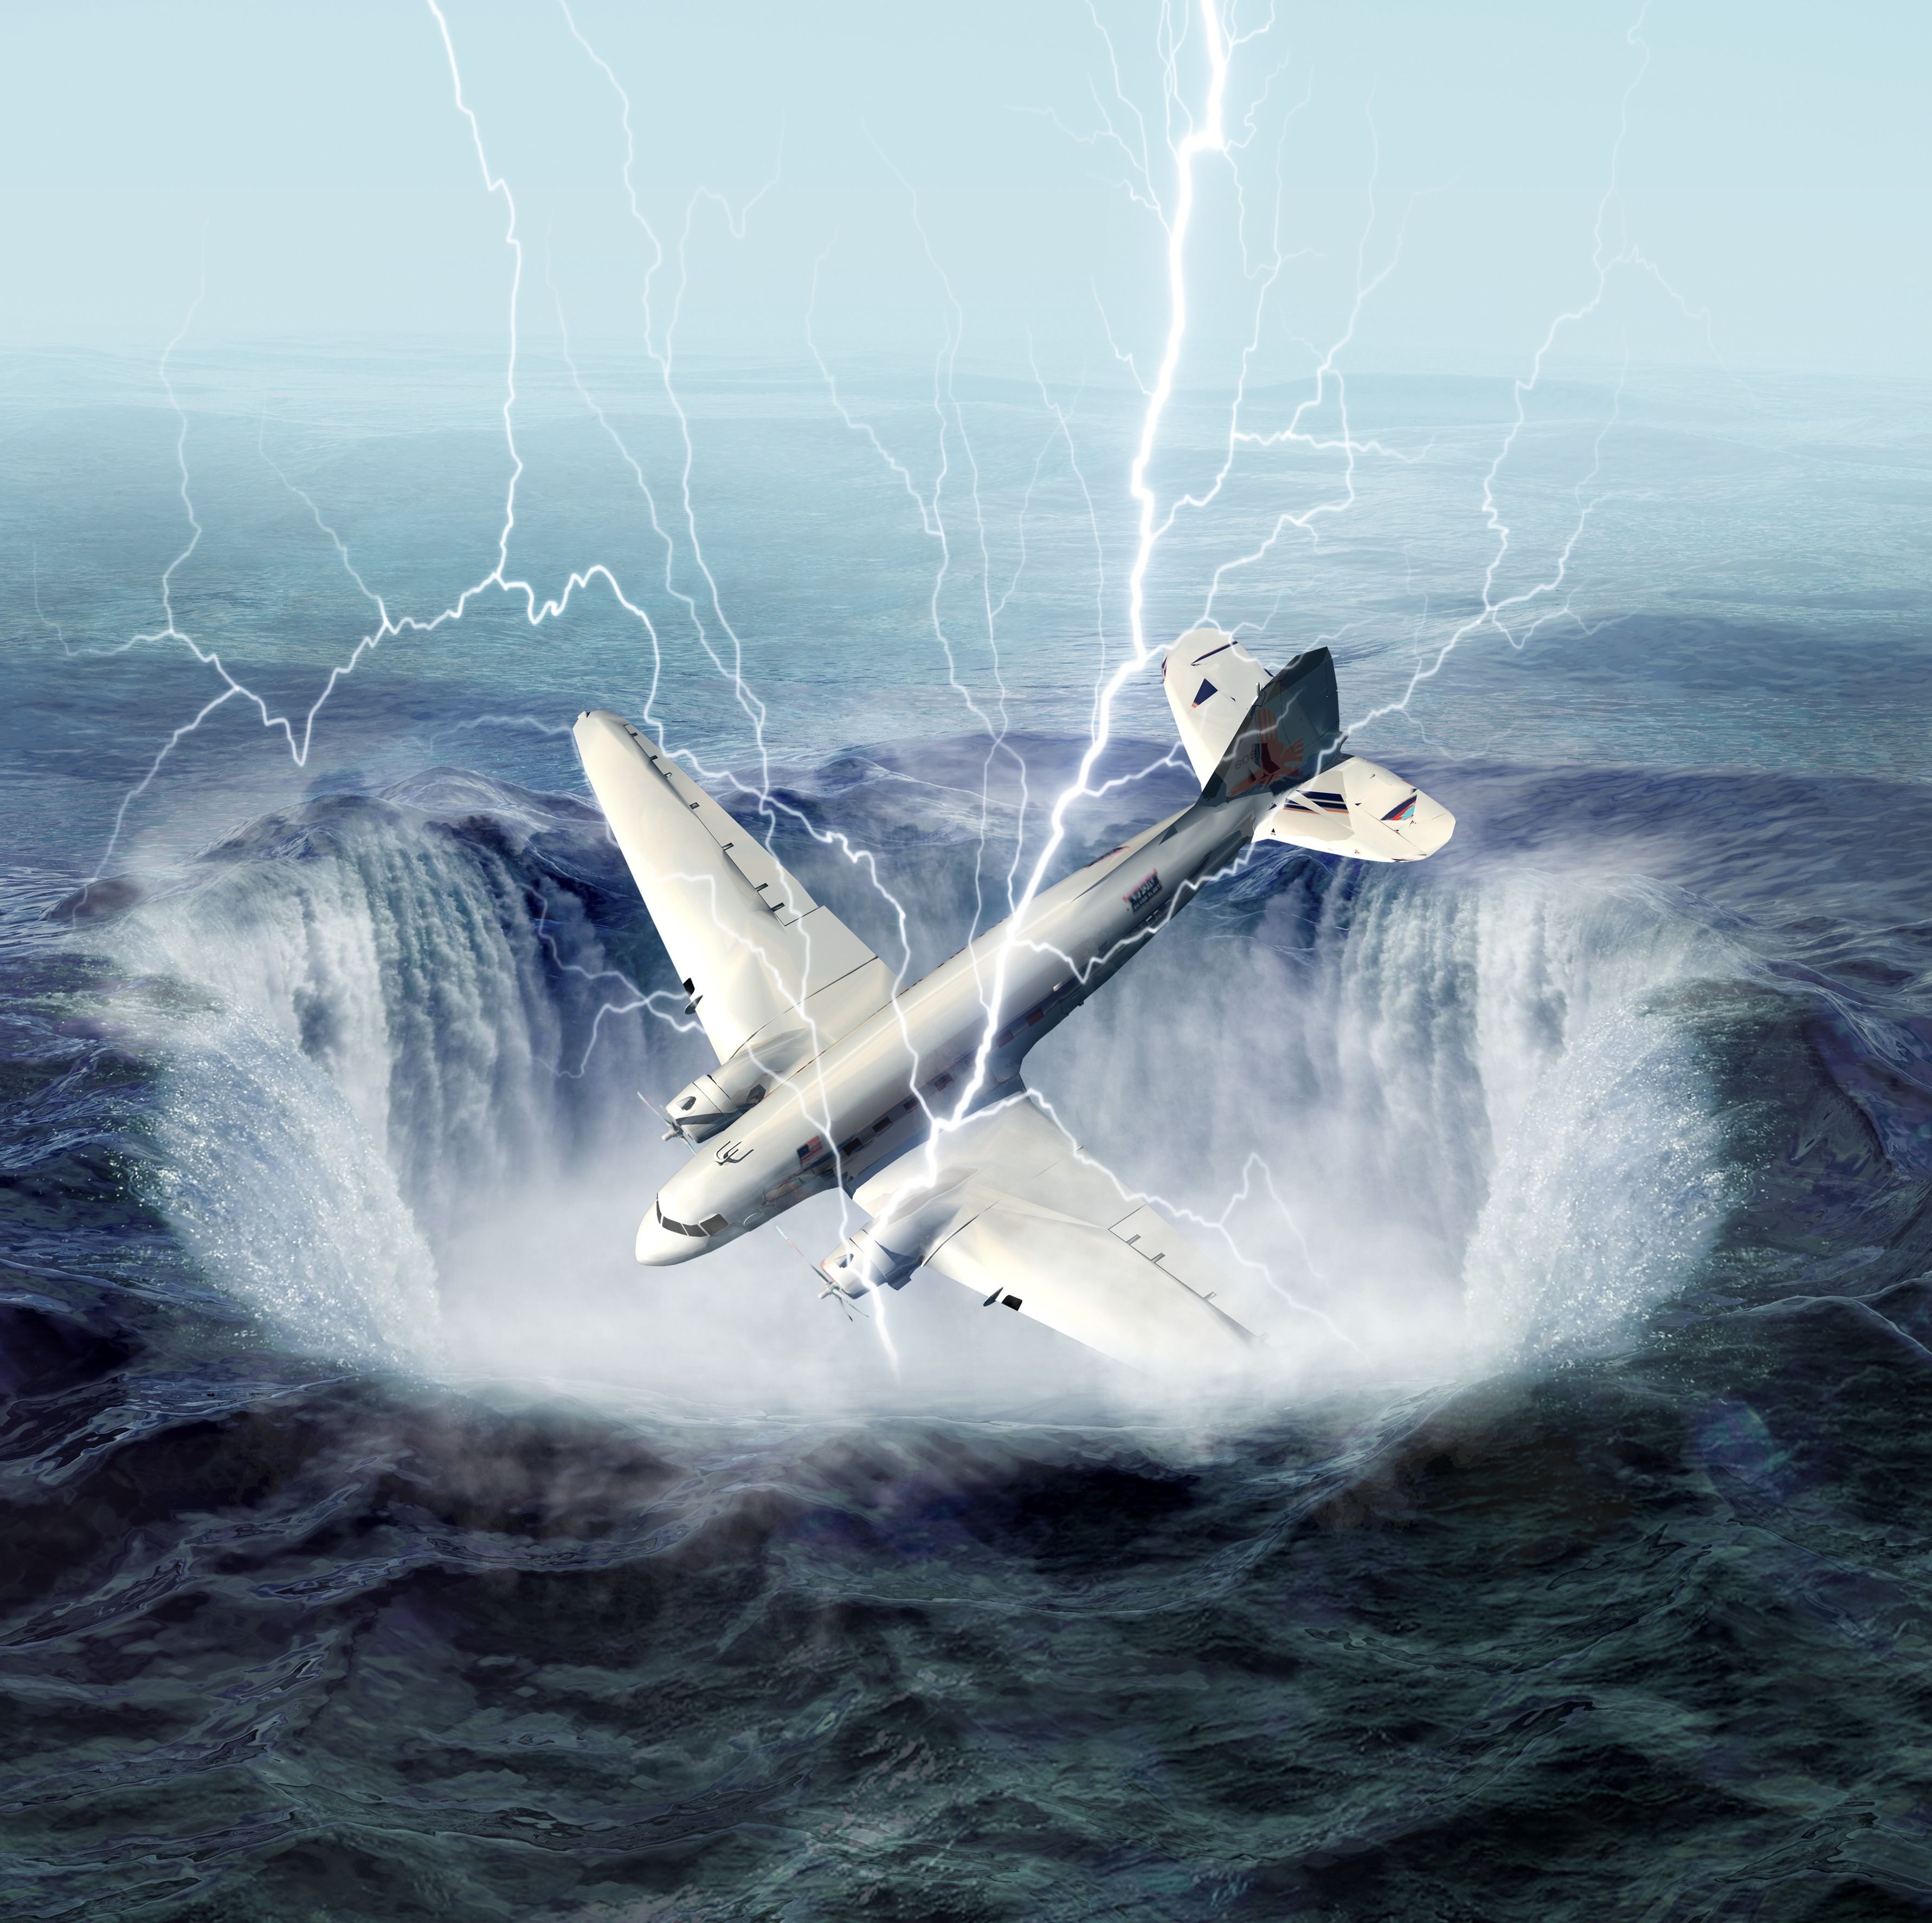 A Scientist Says He's Solved the Bermuda Triangle, Just Like That